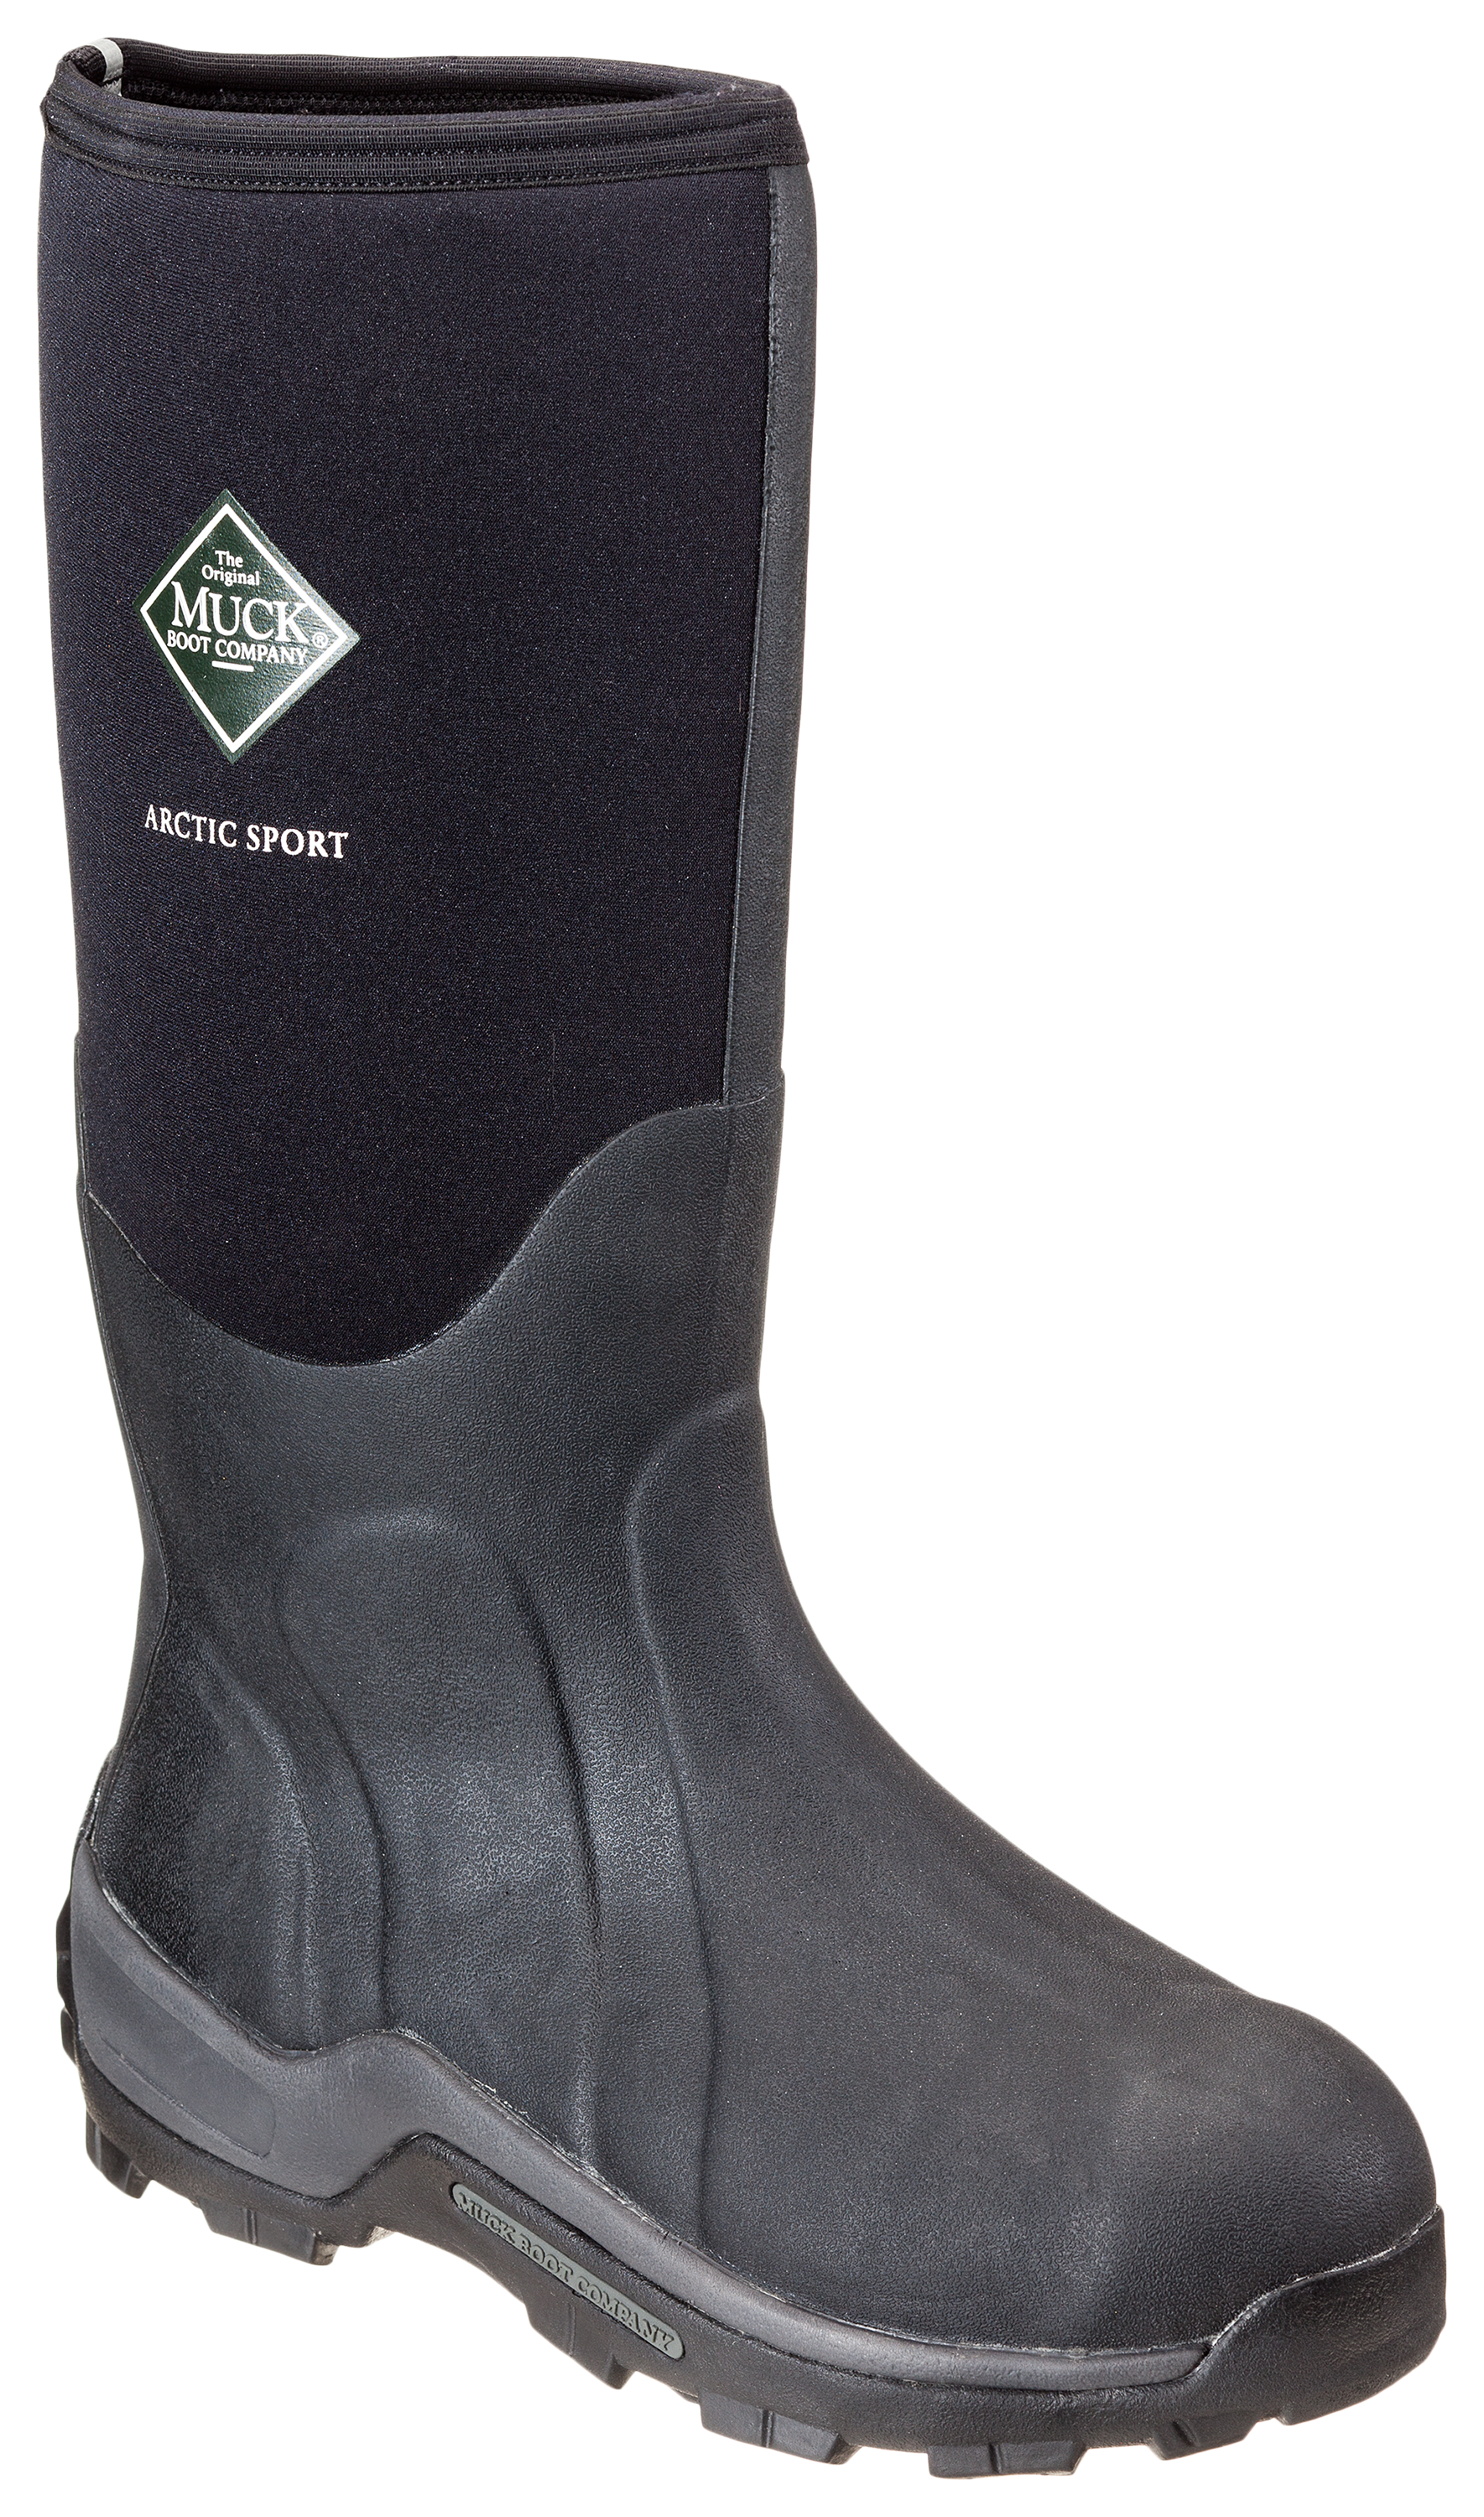 The Original Muck Boot Company Arctic Sport Extreme-Conditions Steel ...